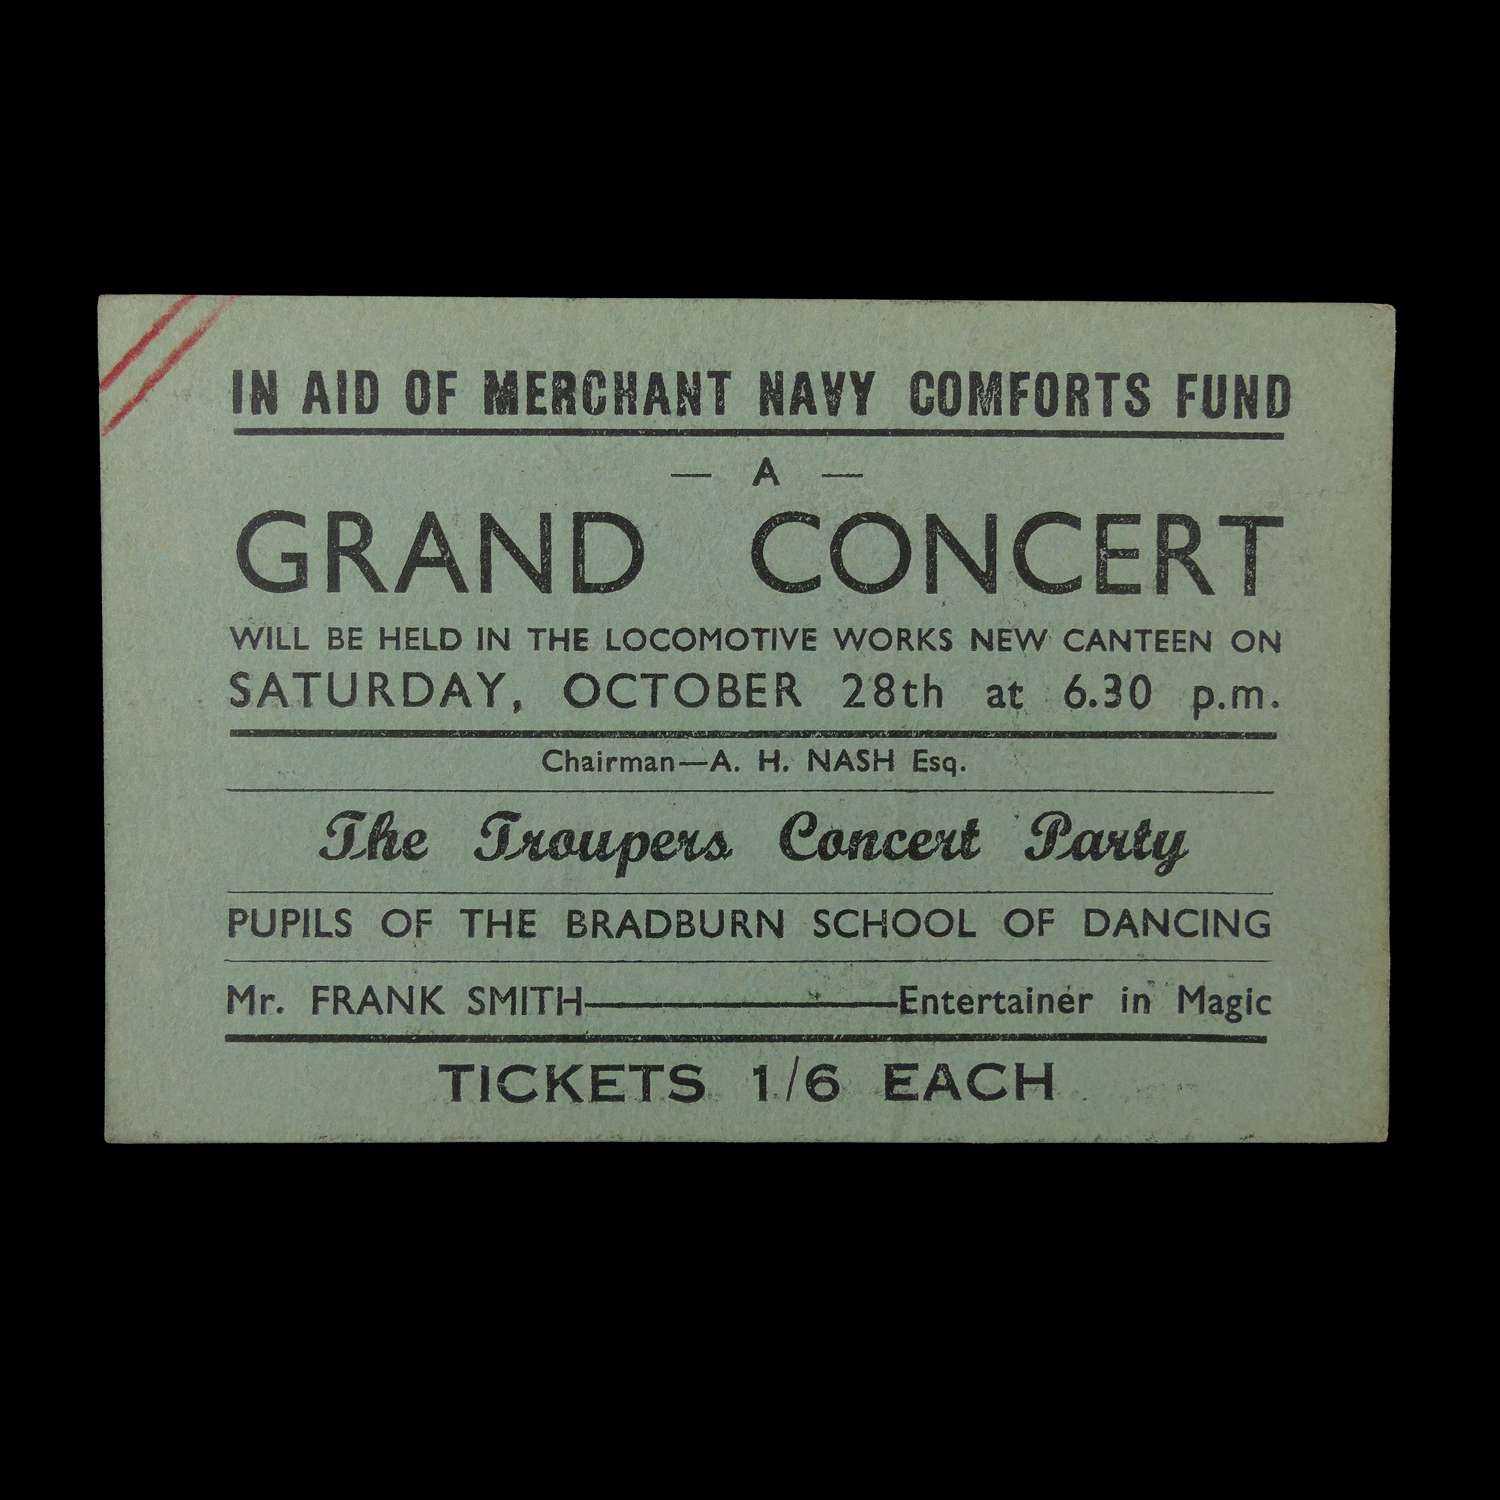 Wartime works canteen Grand Concert ticket